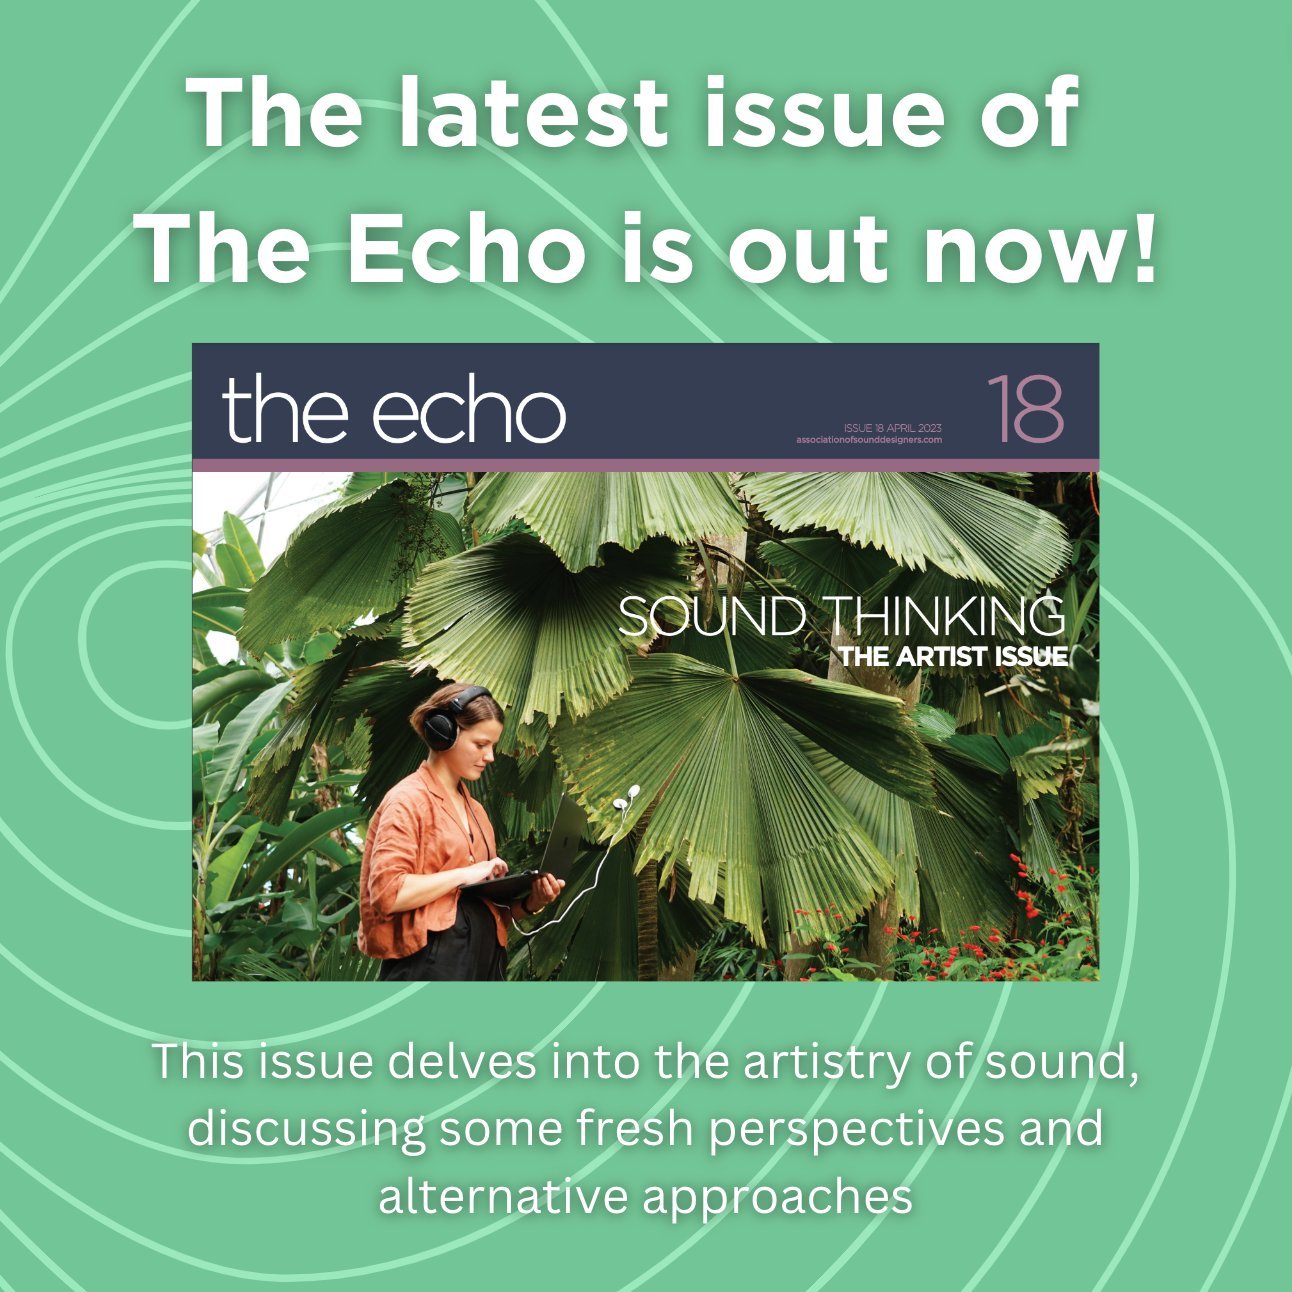 The Echo: Cover and interview